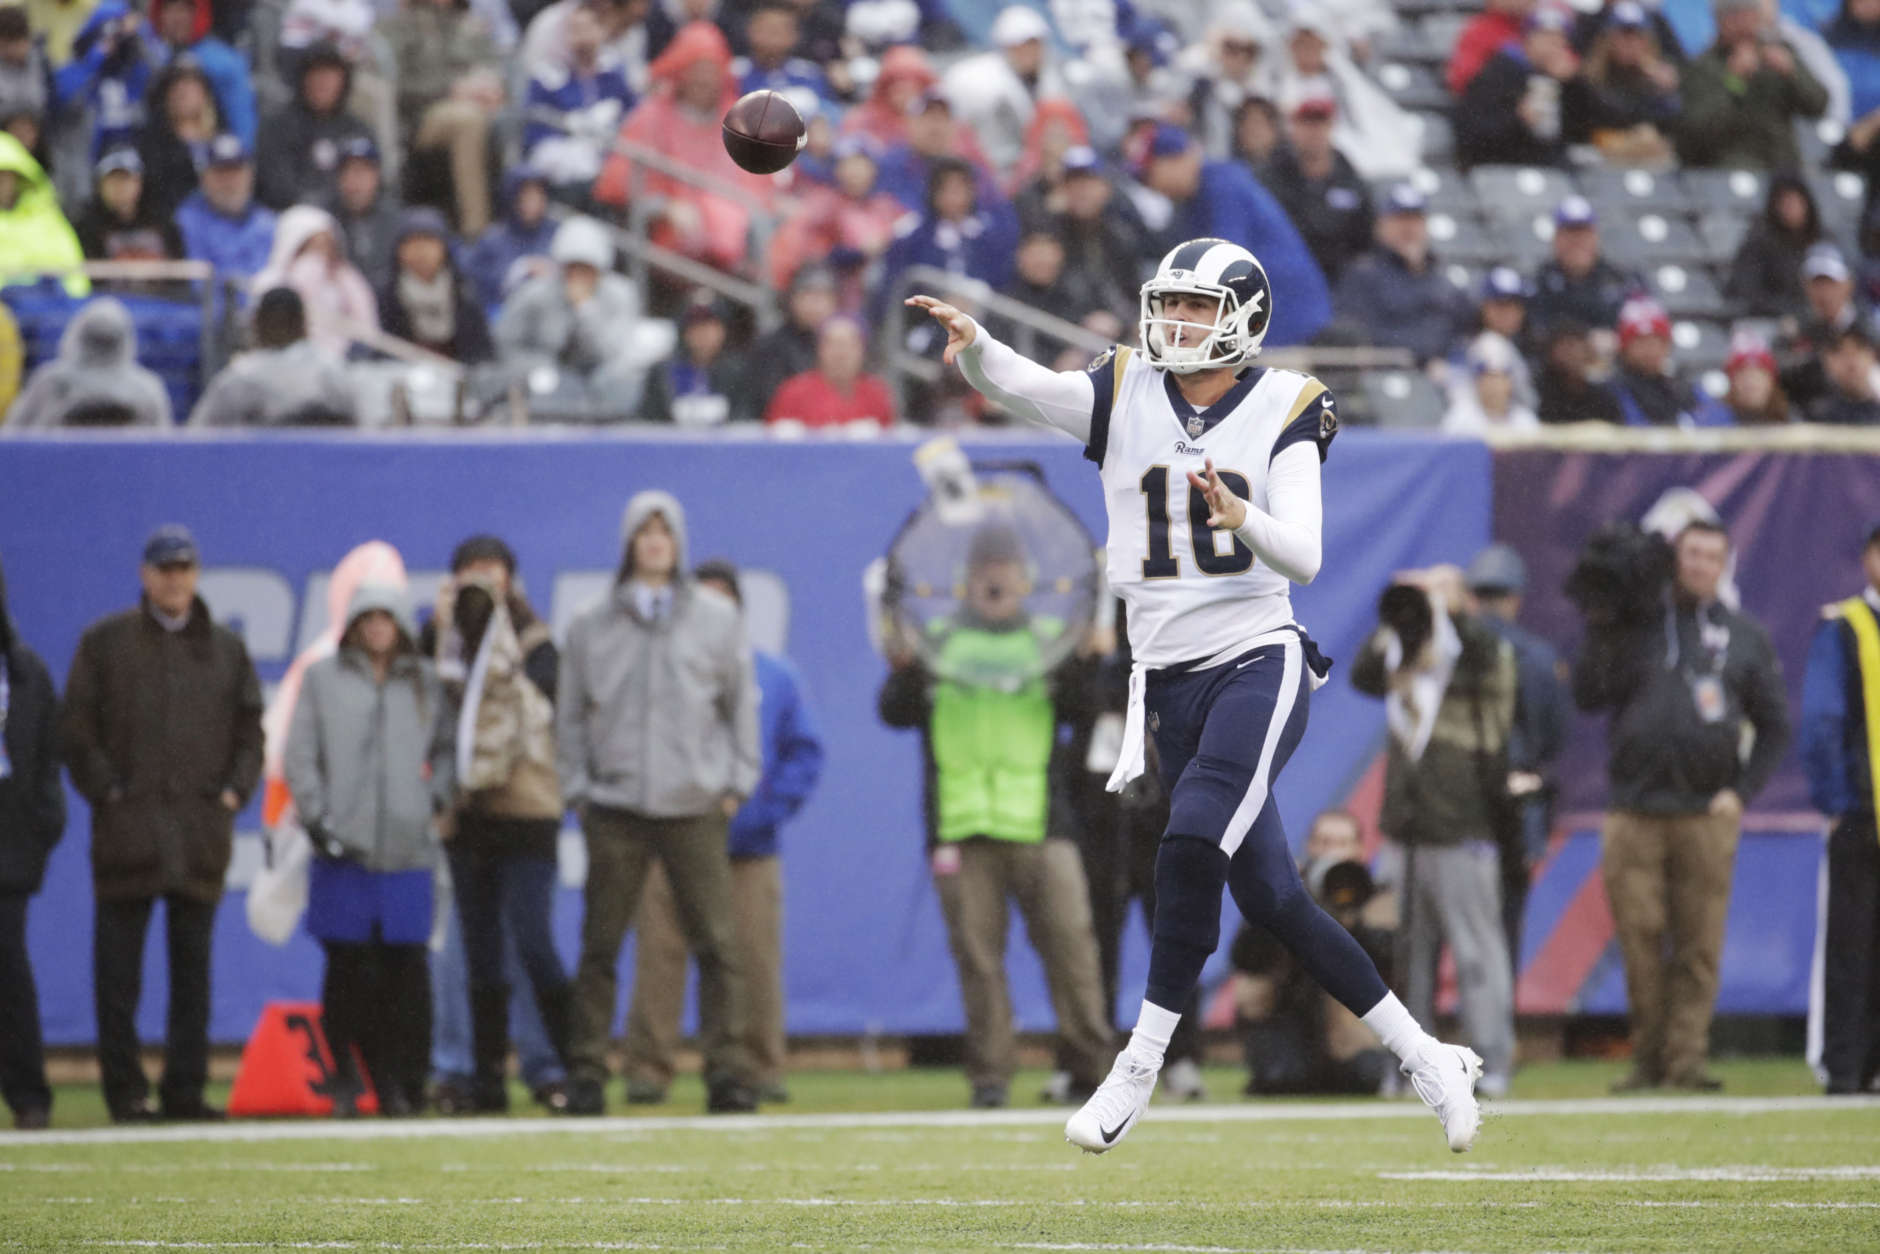 Los Angeles Rams quarterback Jared Goff (16) throws a pass during the first half of an NFL football game against the New York Giants Sunday, Nov. 5, 2017, in East Rutherford, N.J. (AP Photo/Julio Cortez)